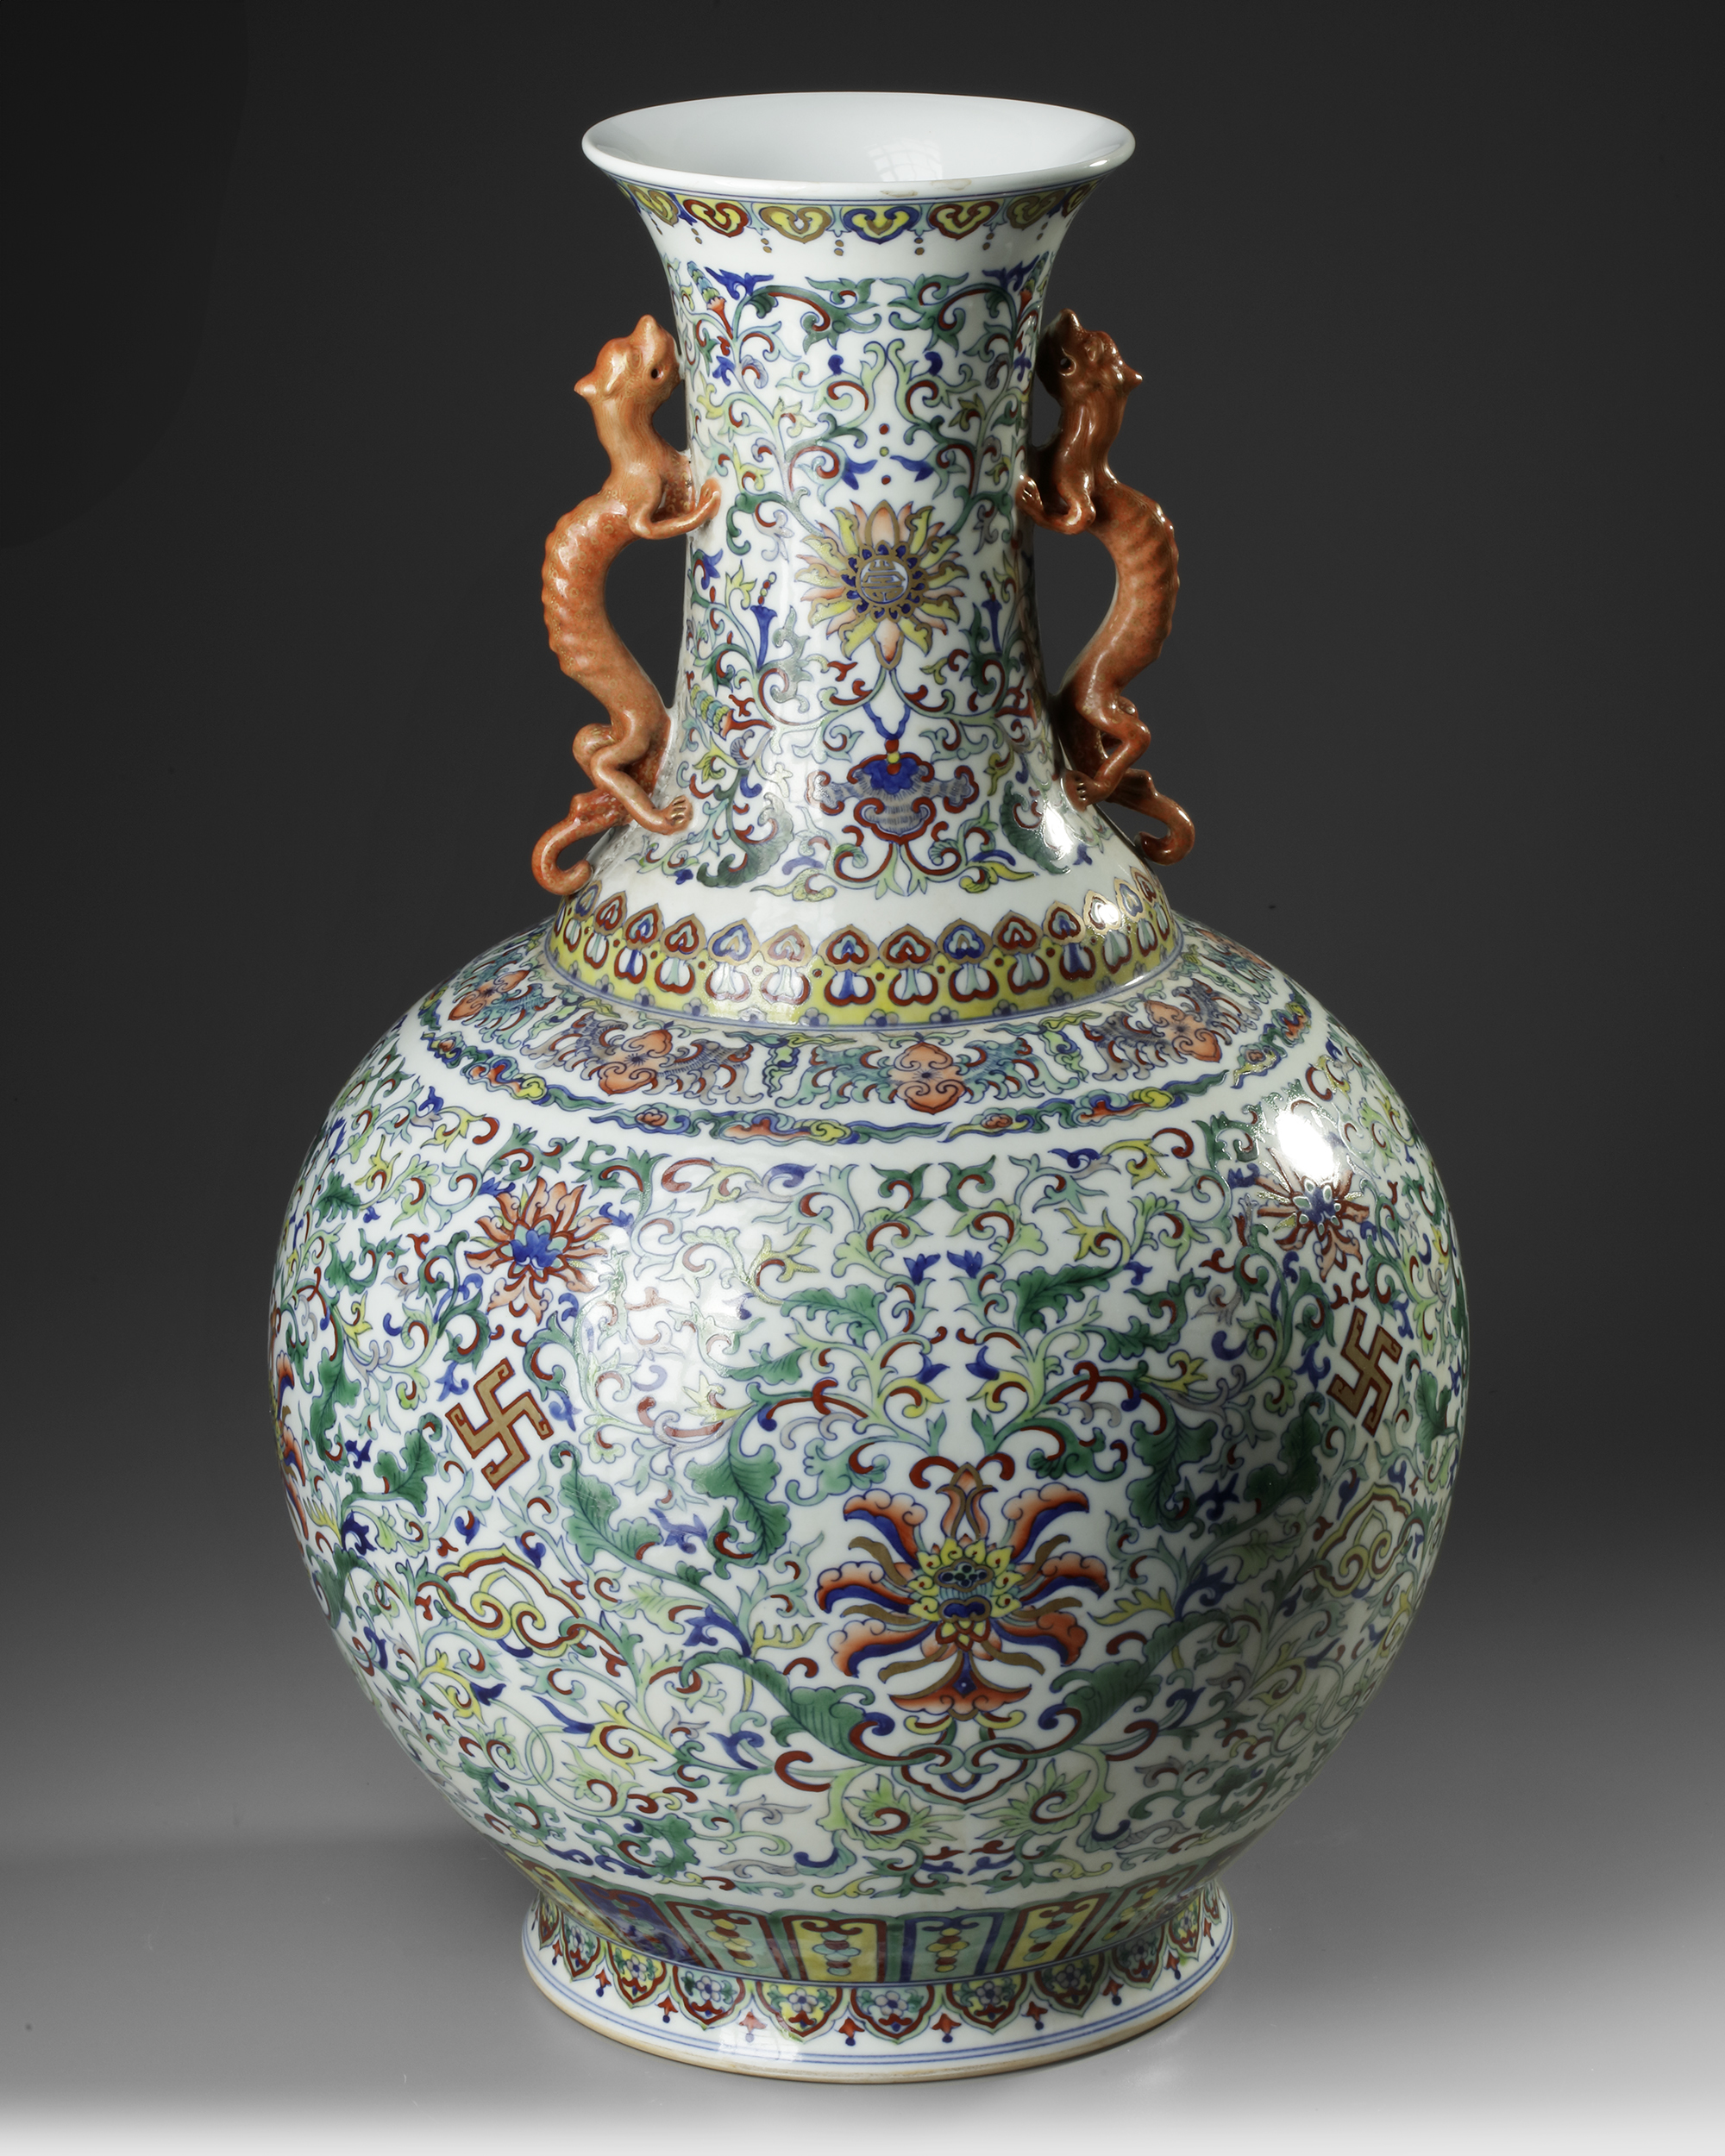 A LARGE CHINESE DOUCAI BOTTLE VASE, 19TH-20TH CENTURY - Image 2 of 5